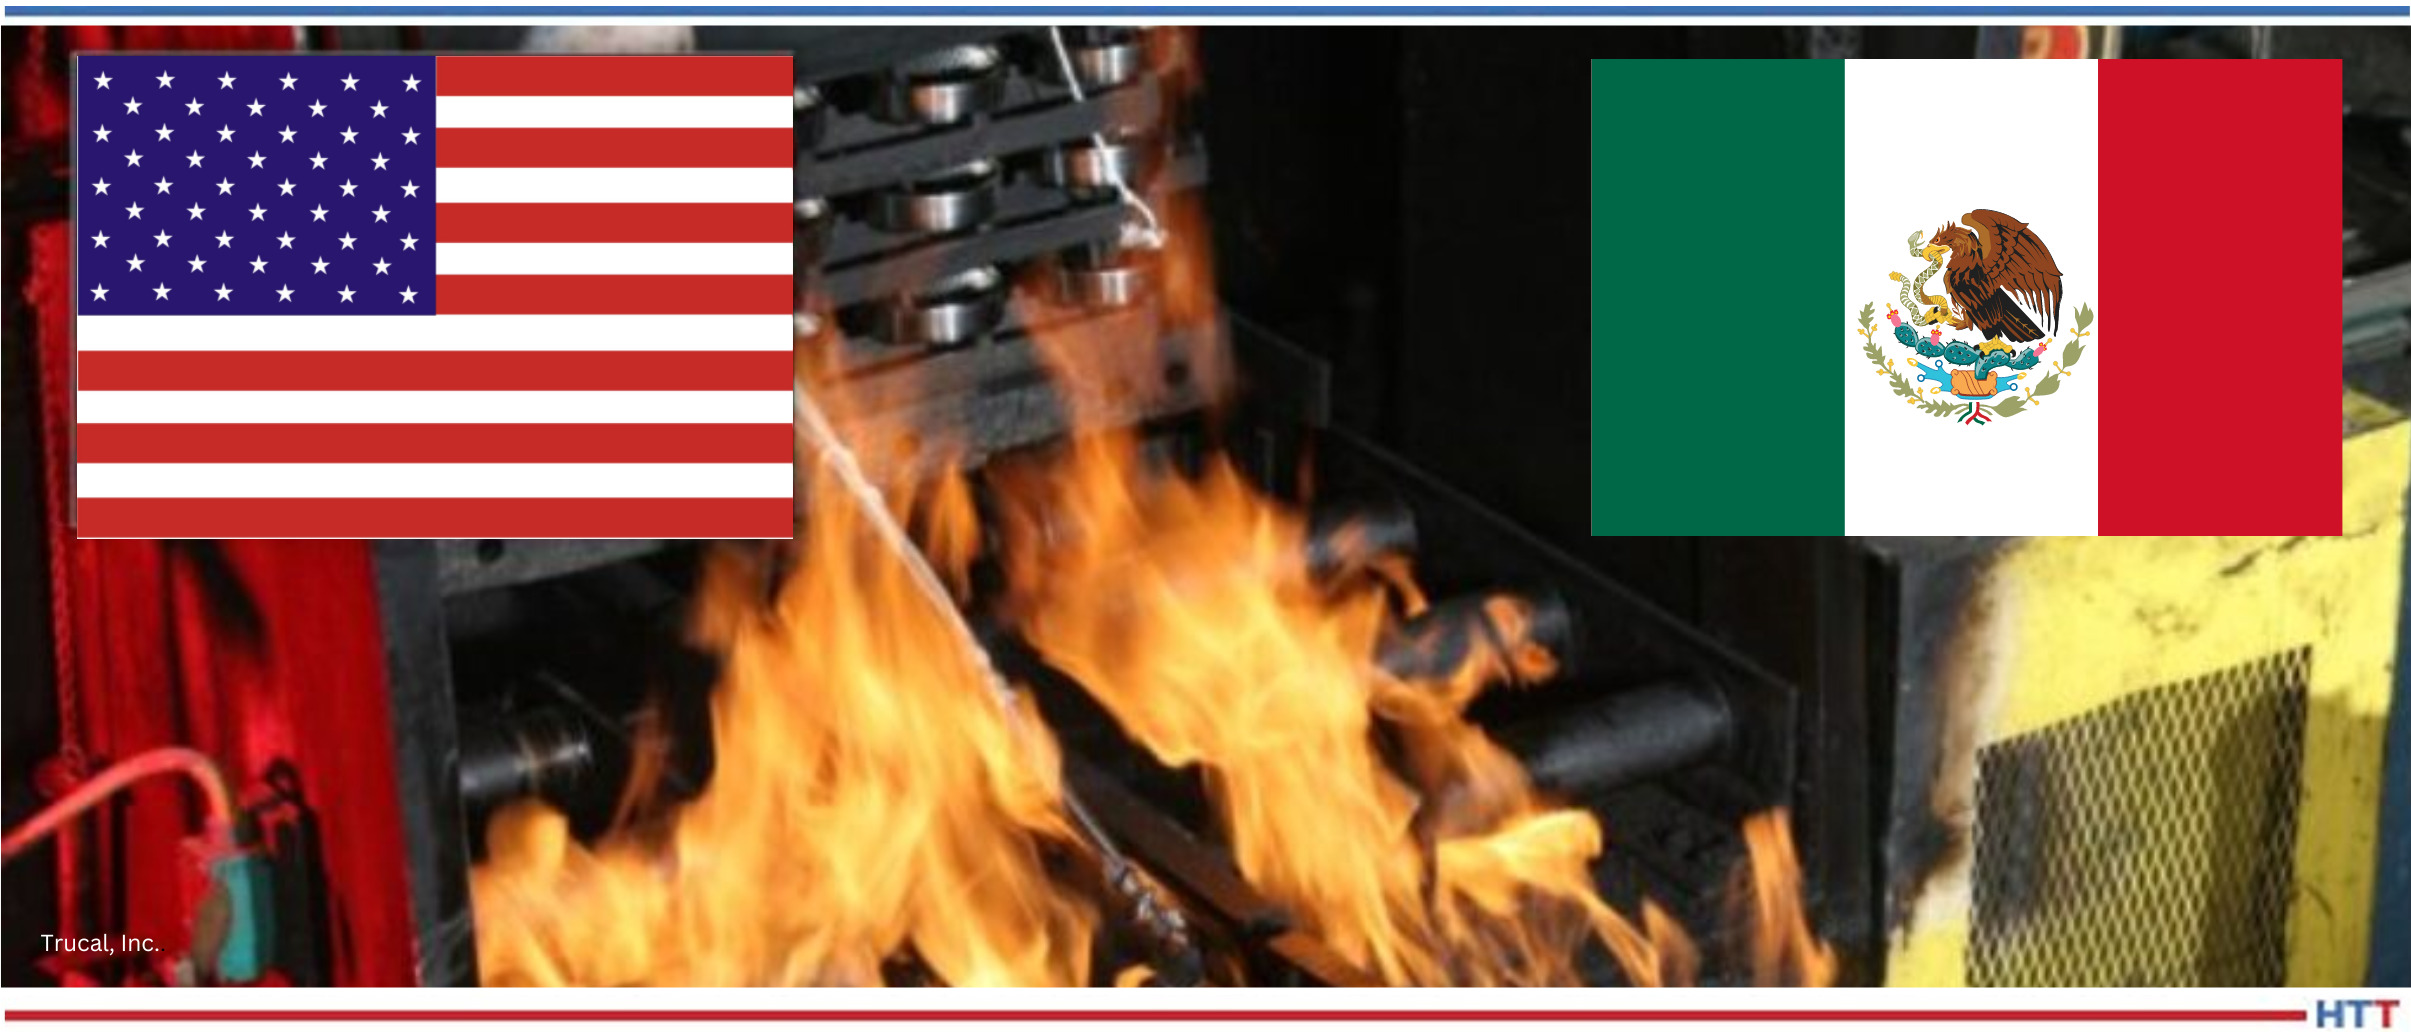 Furnace with U.S. and Mexican flags